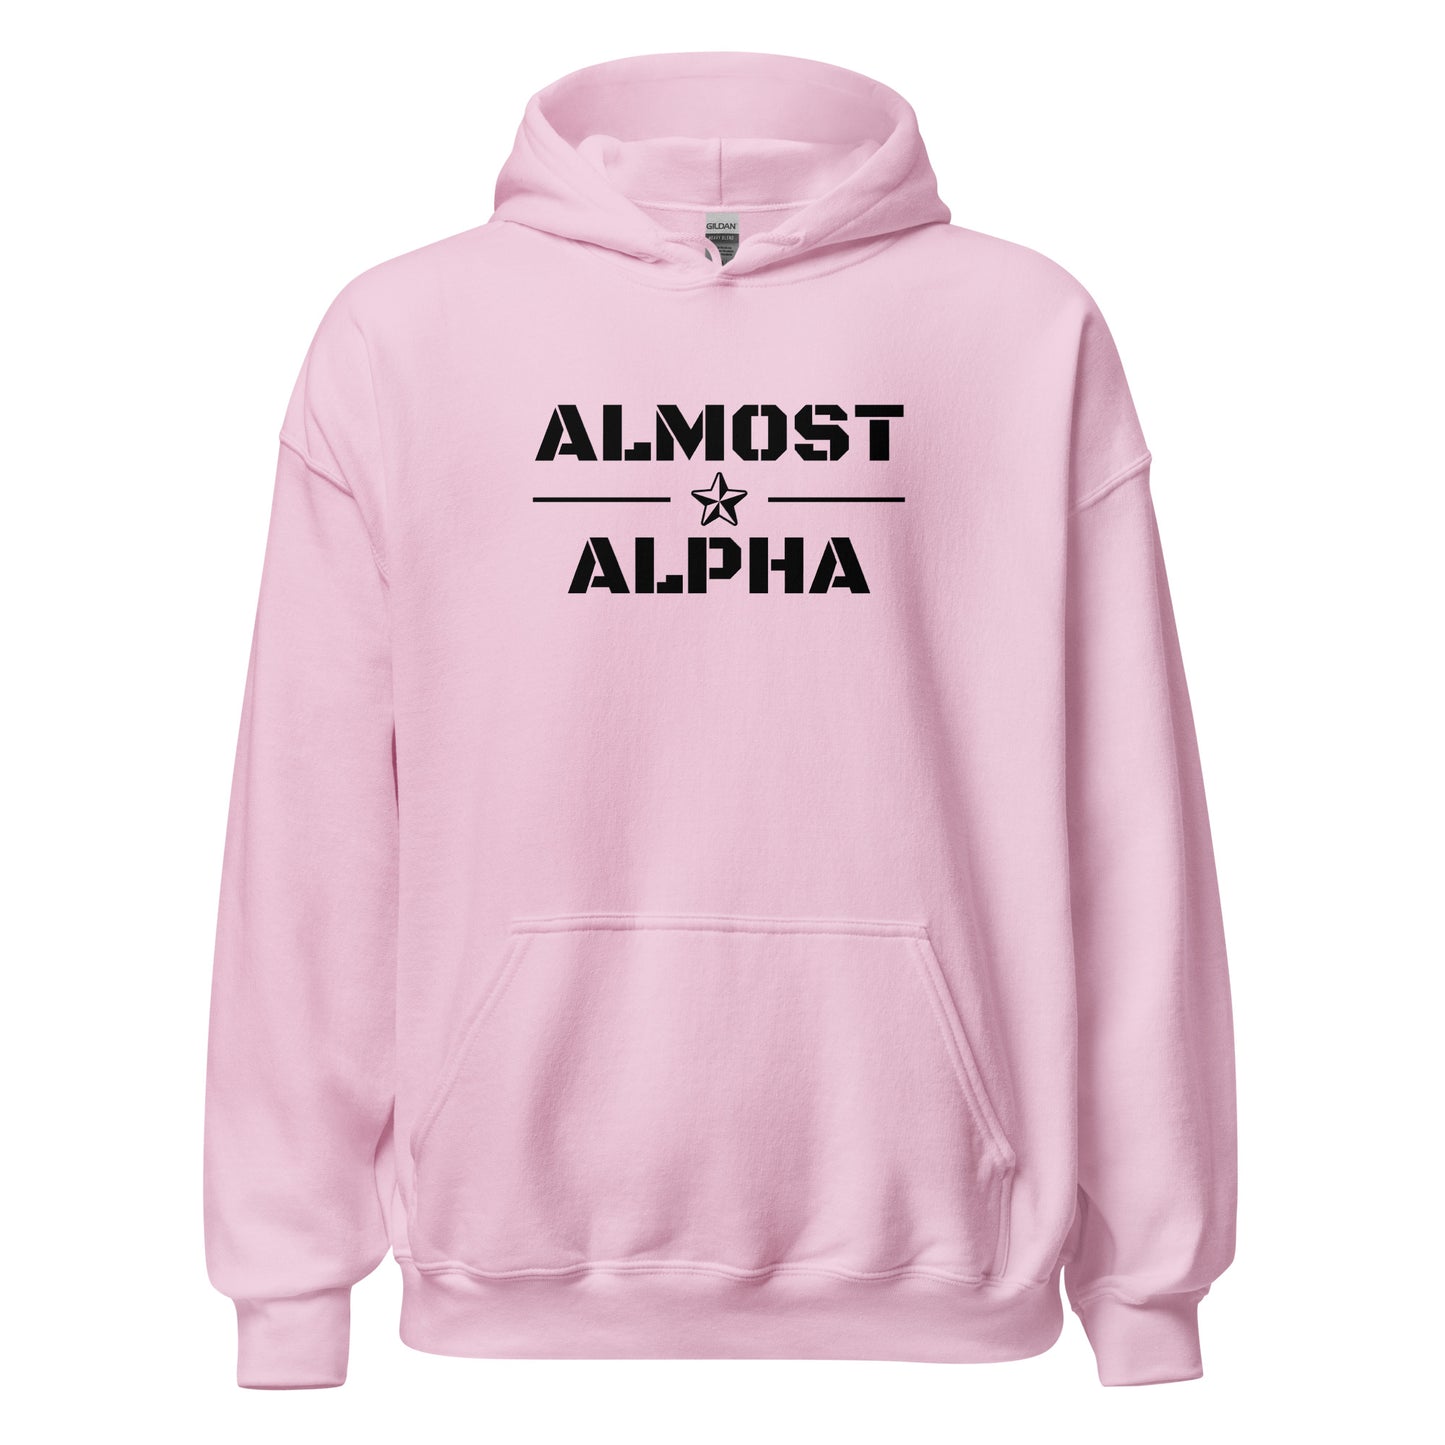 Almost Alpha Hoodie in Light Pink